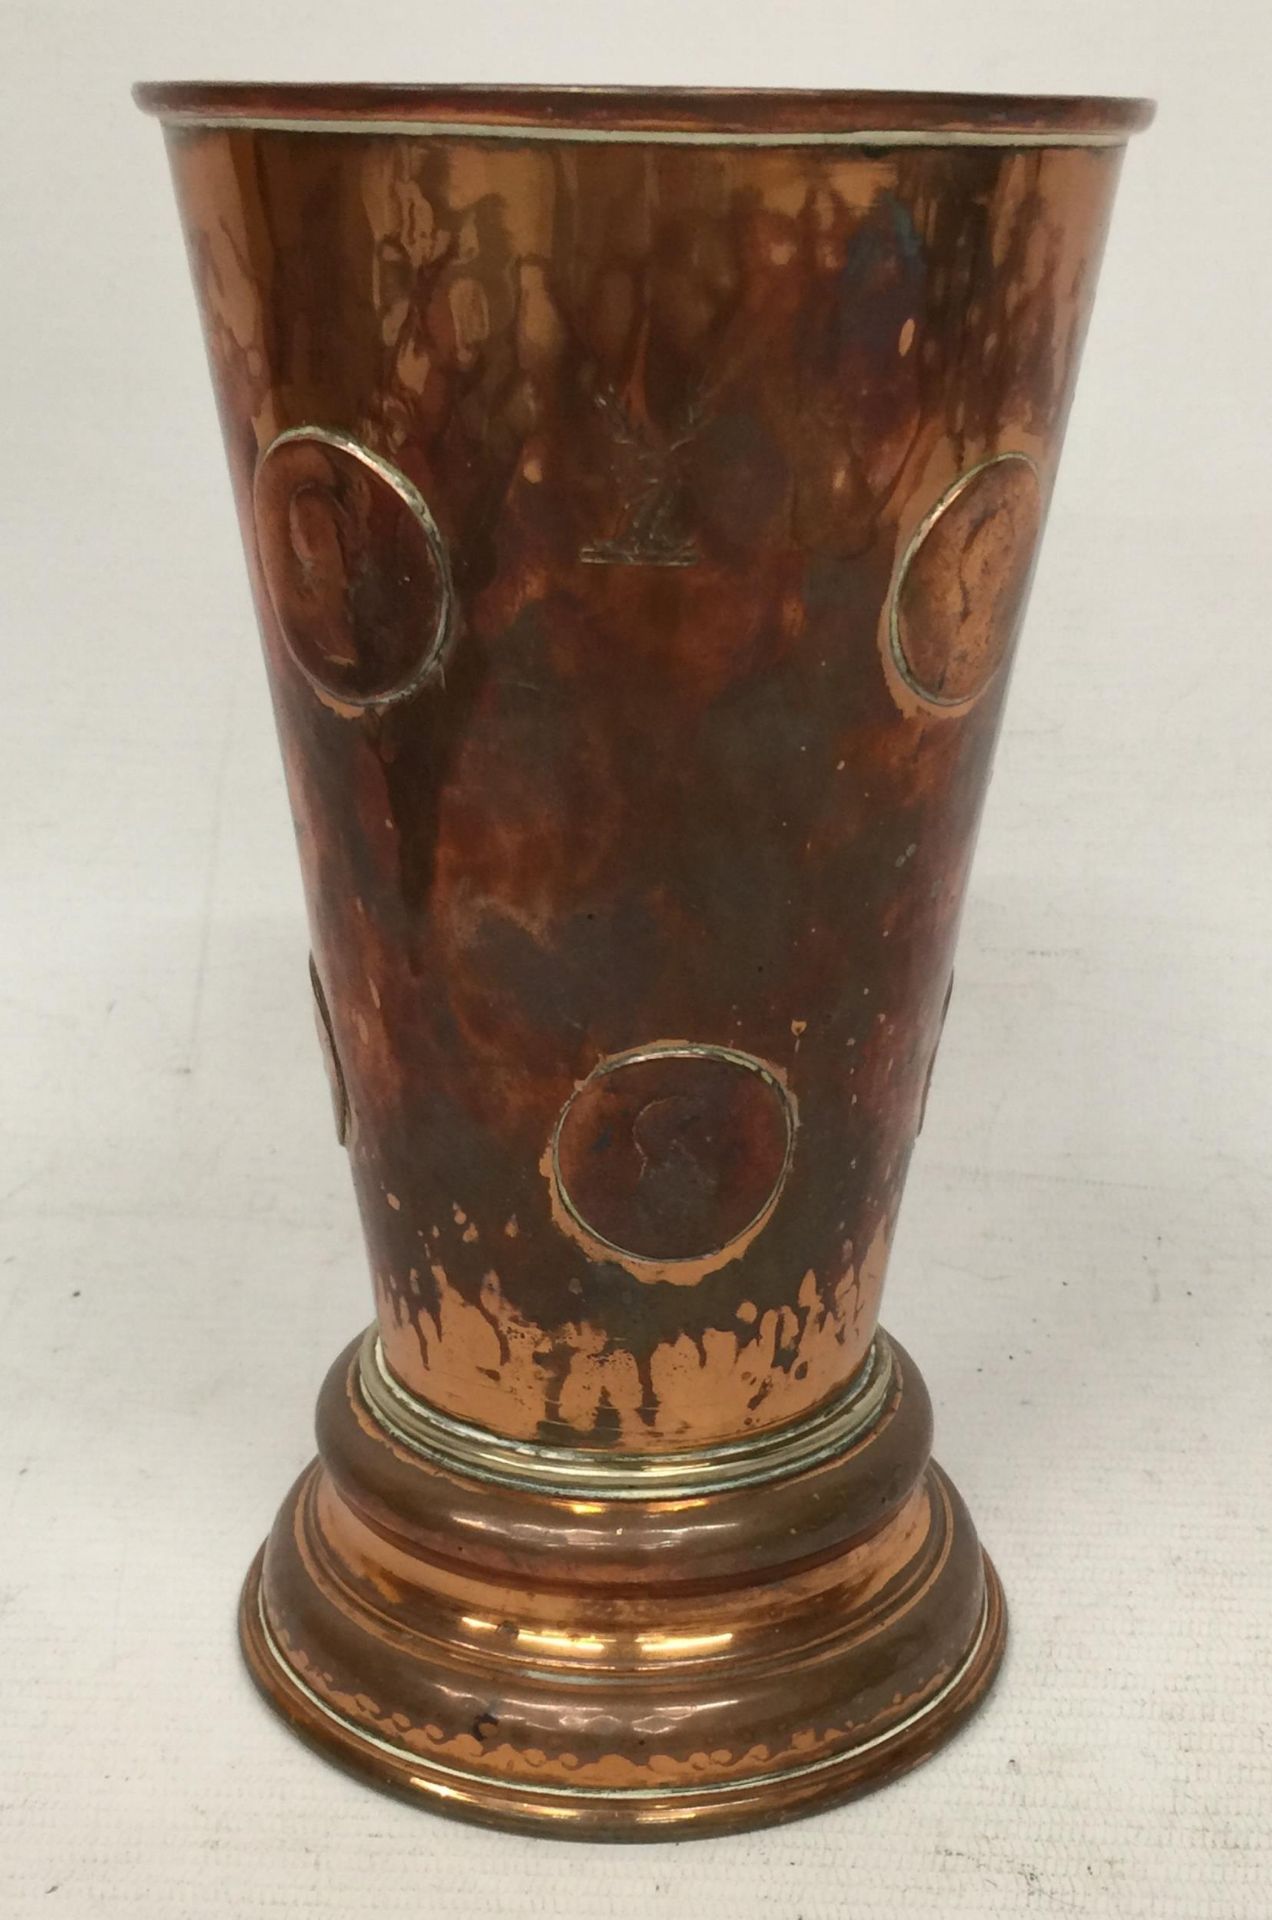 A VINTAGE COPPER GAMBLING TAVERN DICE SHAKING BEAKER EMBEDDED WITH COINS AND DICE BENEATH A GLASS